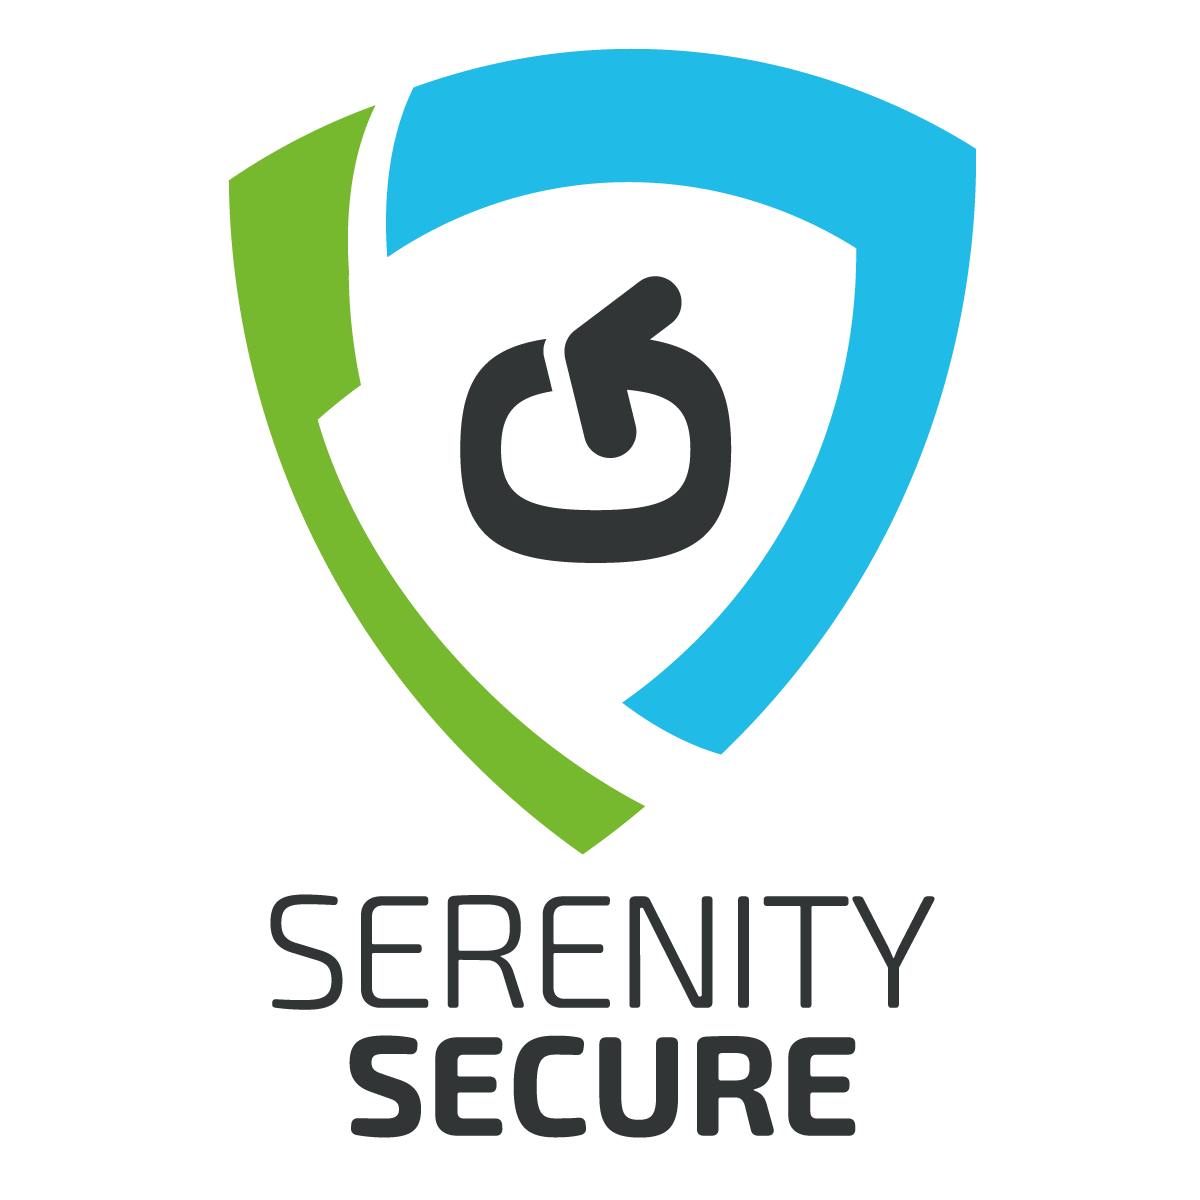 SERENITY SECURE